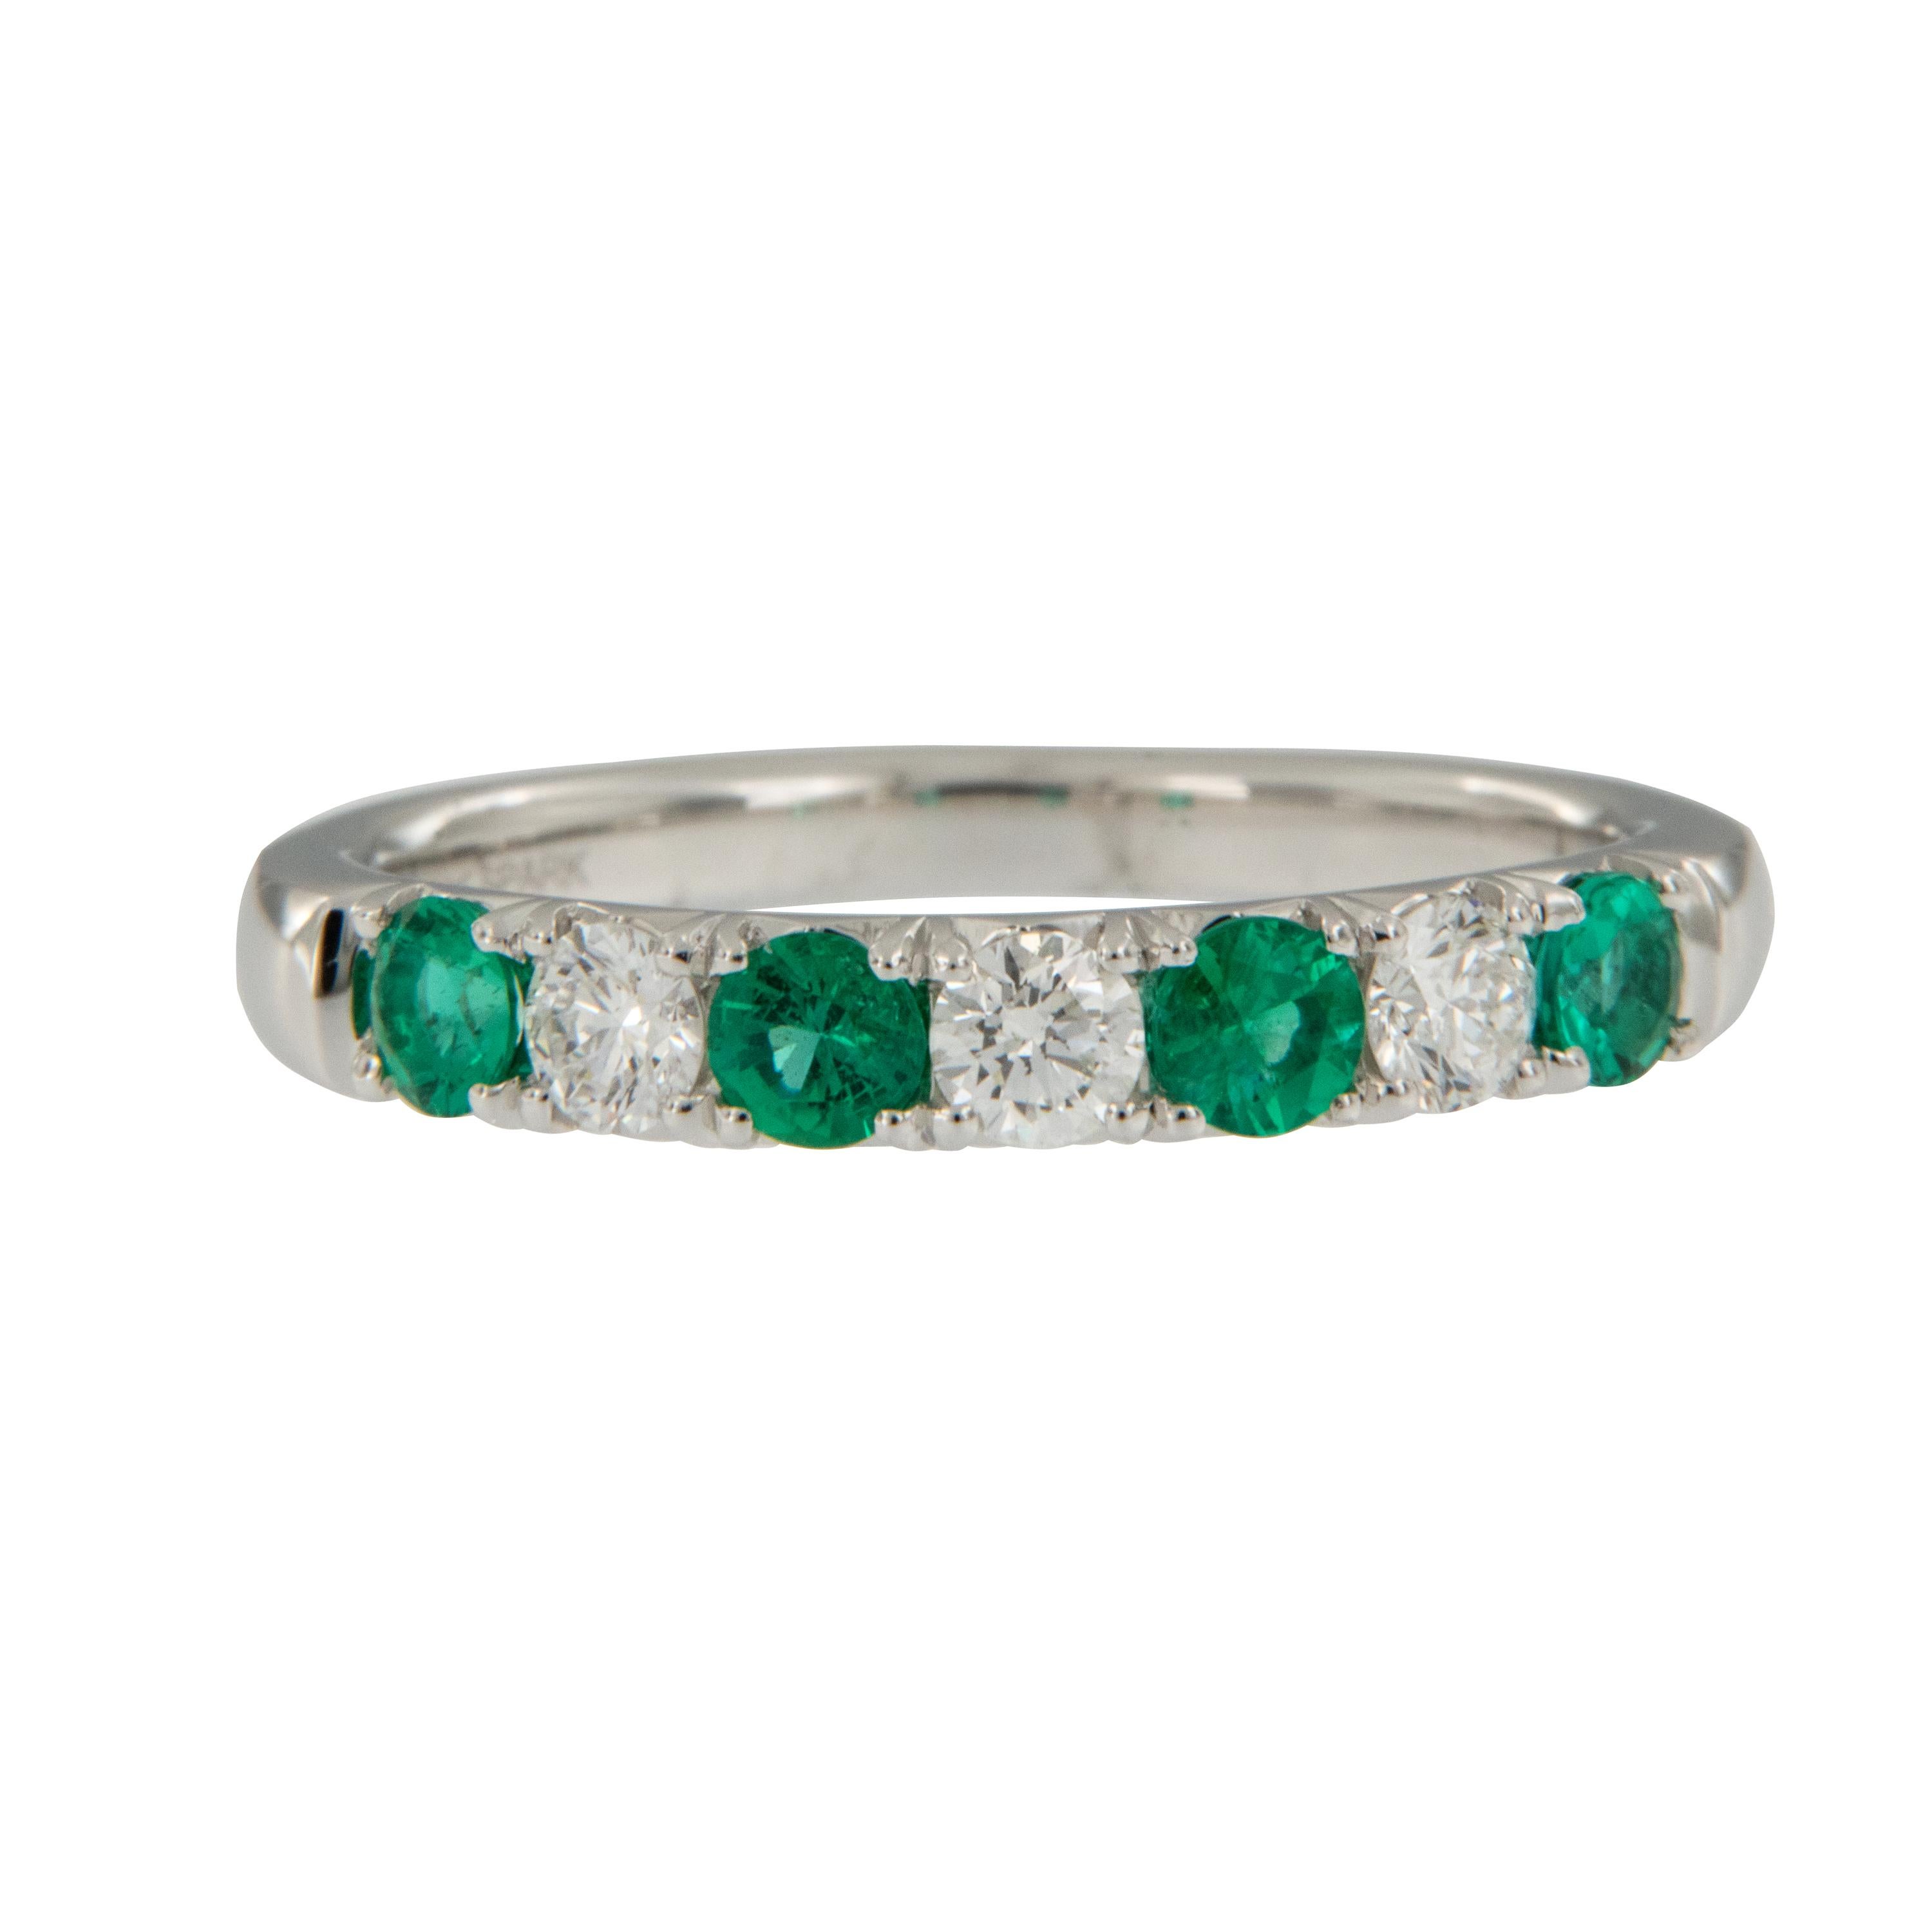 Spark is well known for making some of the most beautiful colored gemstone jewelry for the last 49 years. Crafted in fine 18 karat white gold with the brightest, greenest emeralds & beautiful white diamonds, this ring looks fantastic alone or